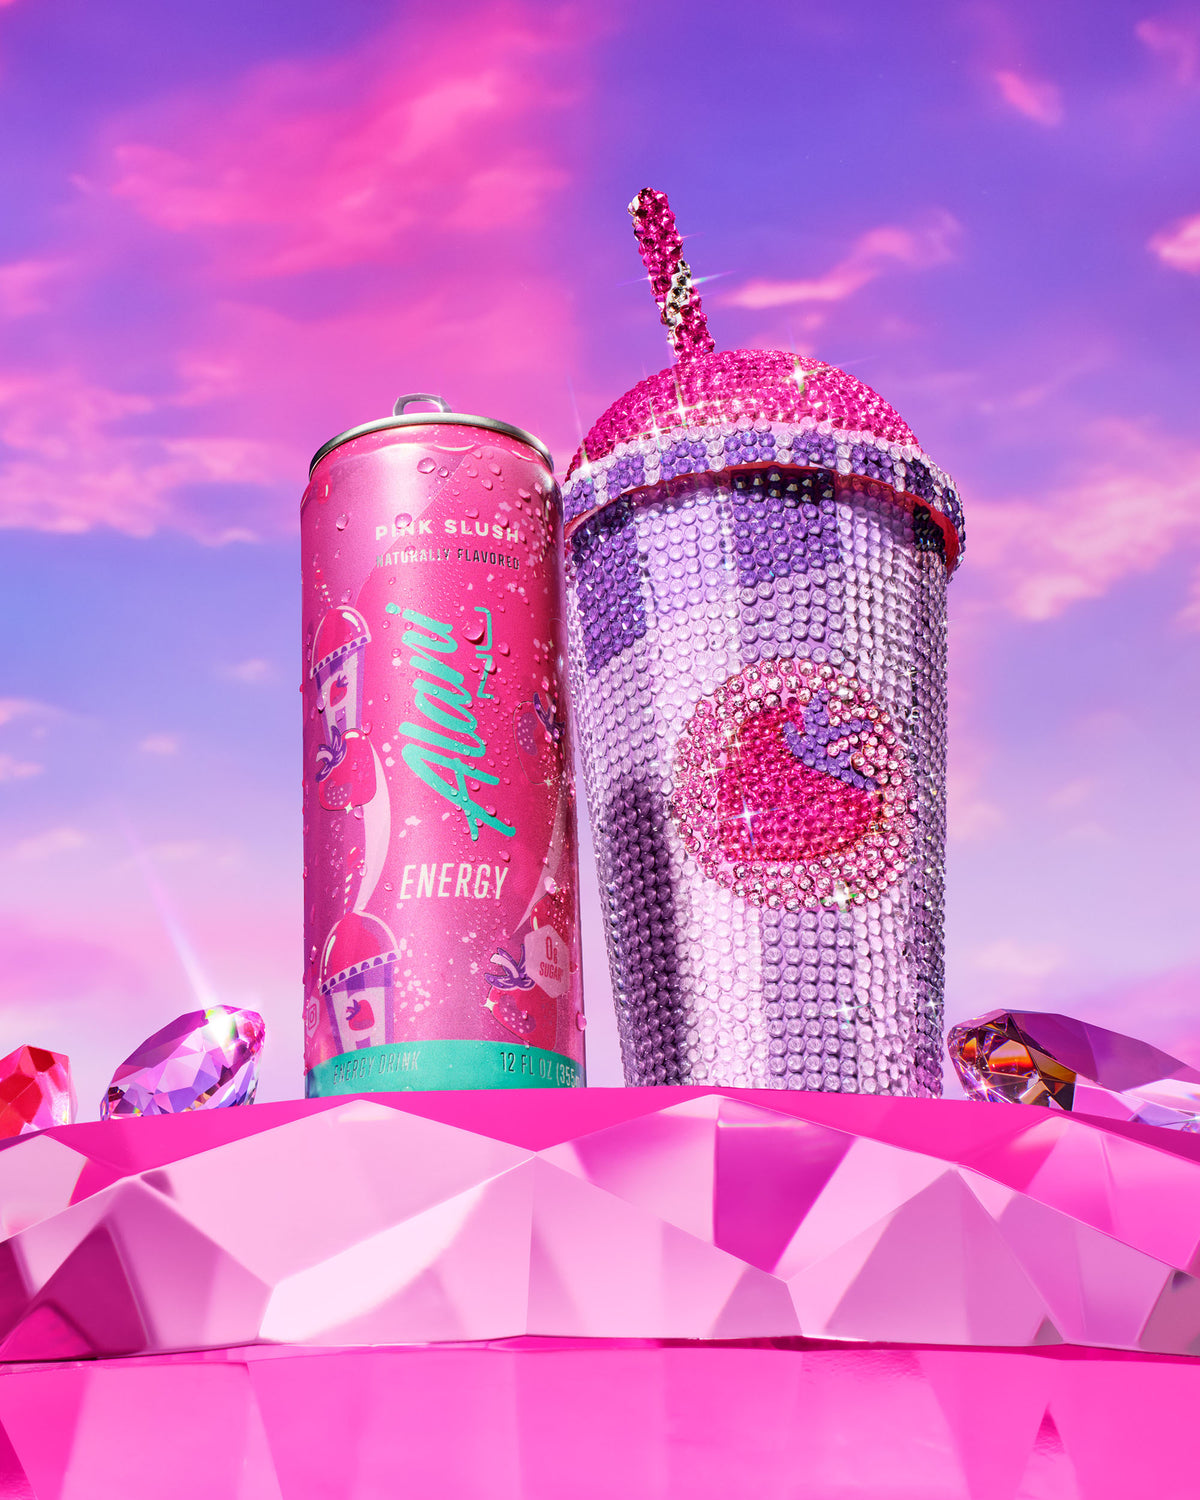 Alani Nu Pink Slush Energy Drink can next to a purple and pink bedazzled slushie cup.  